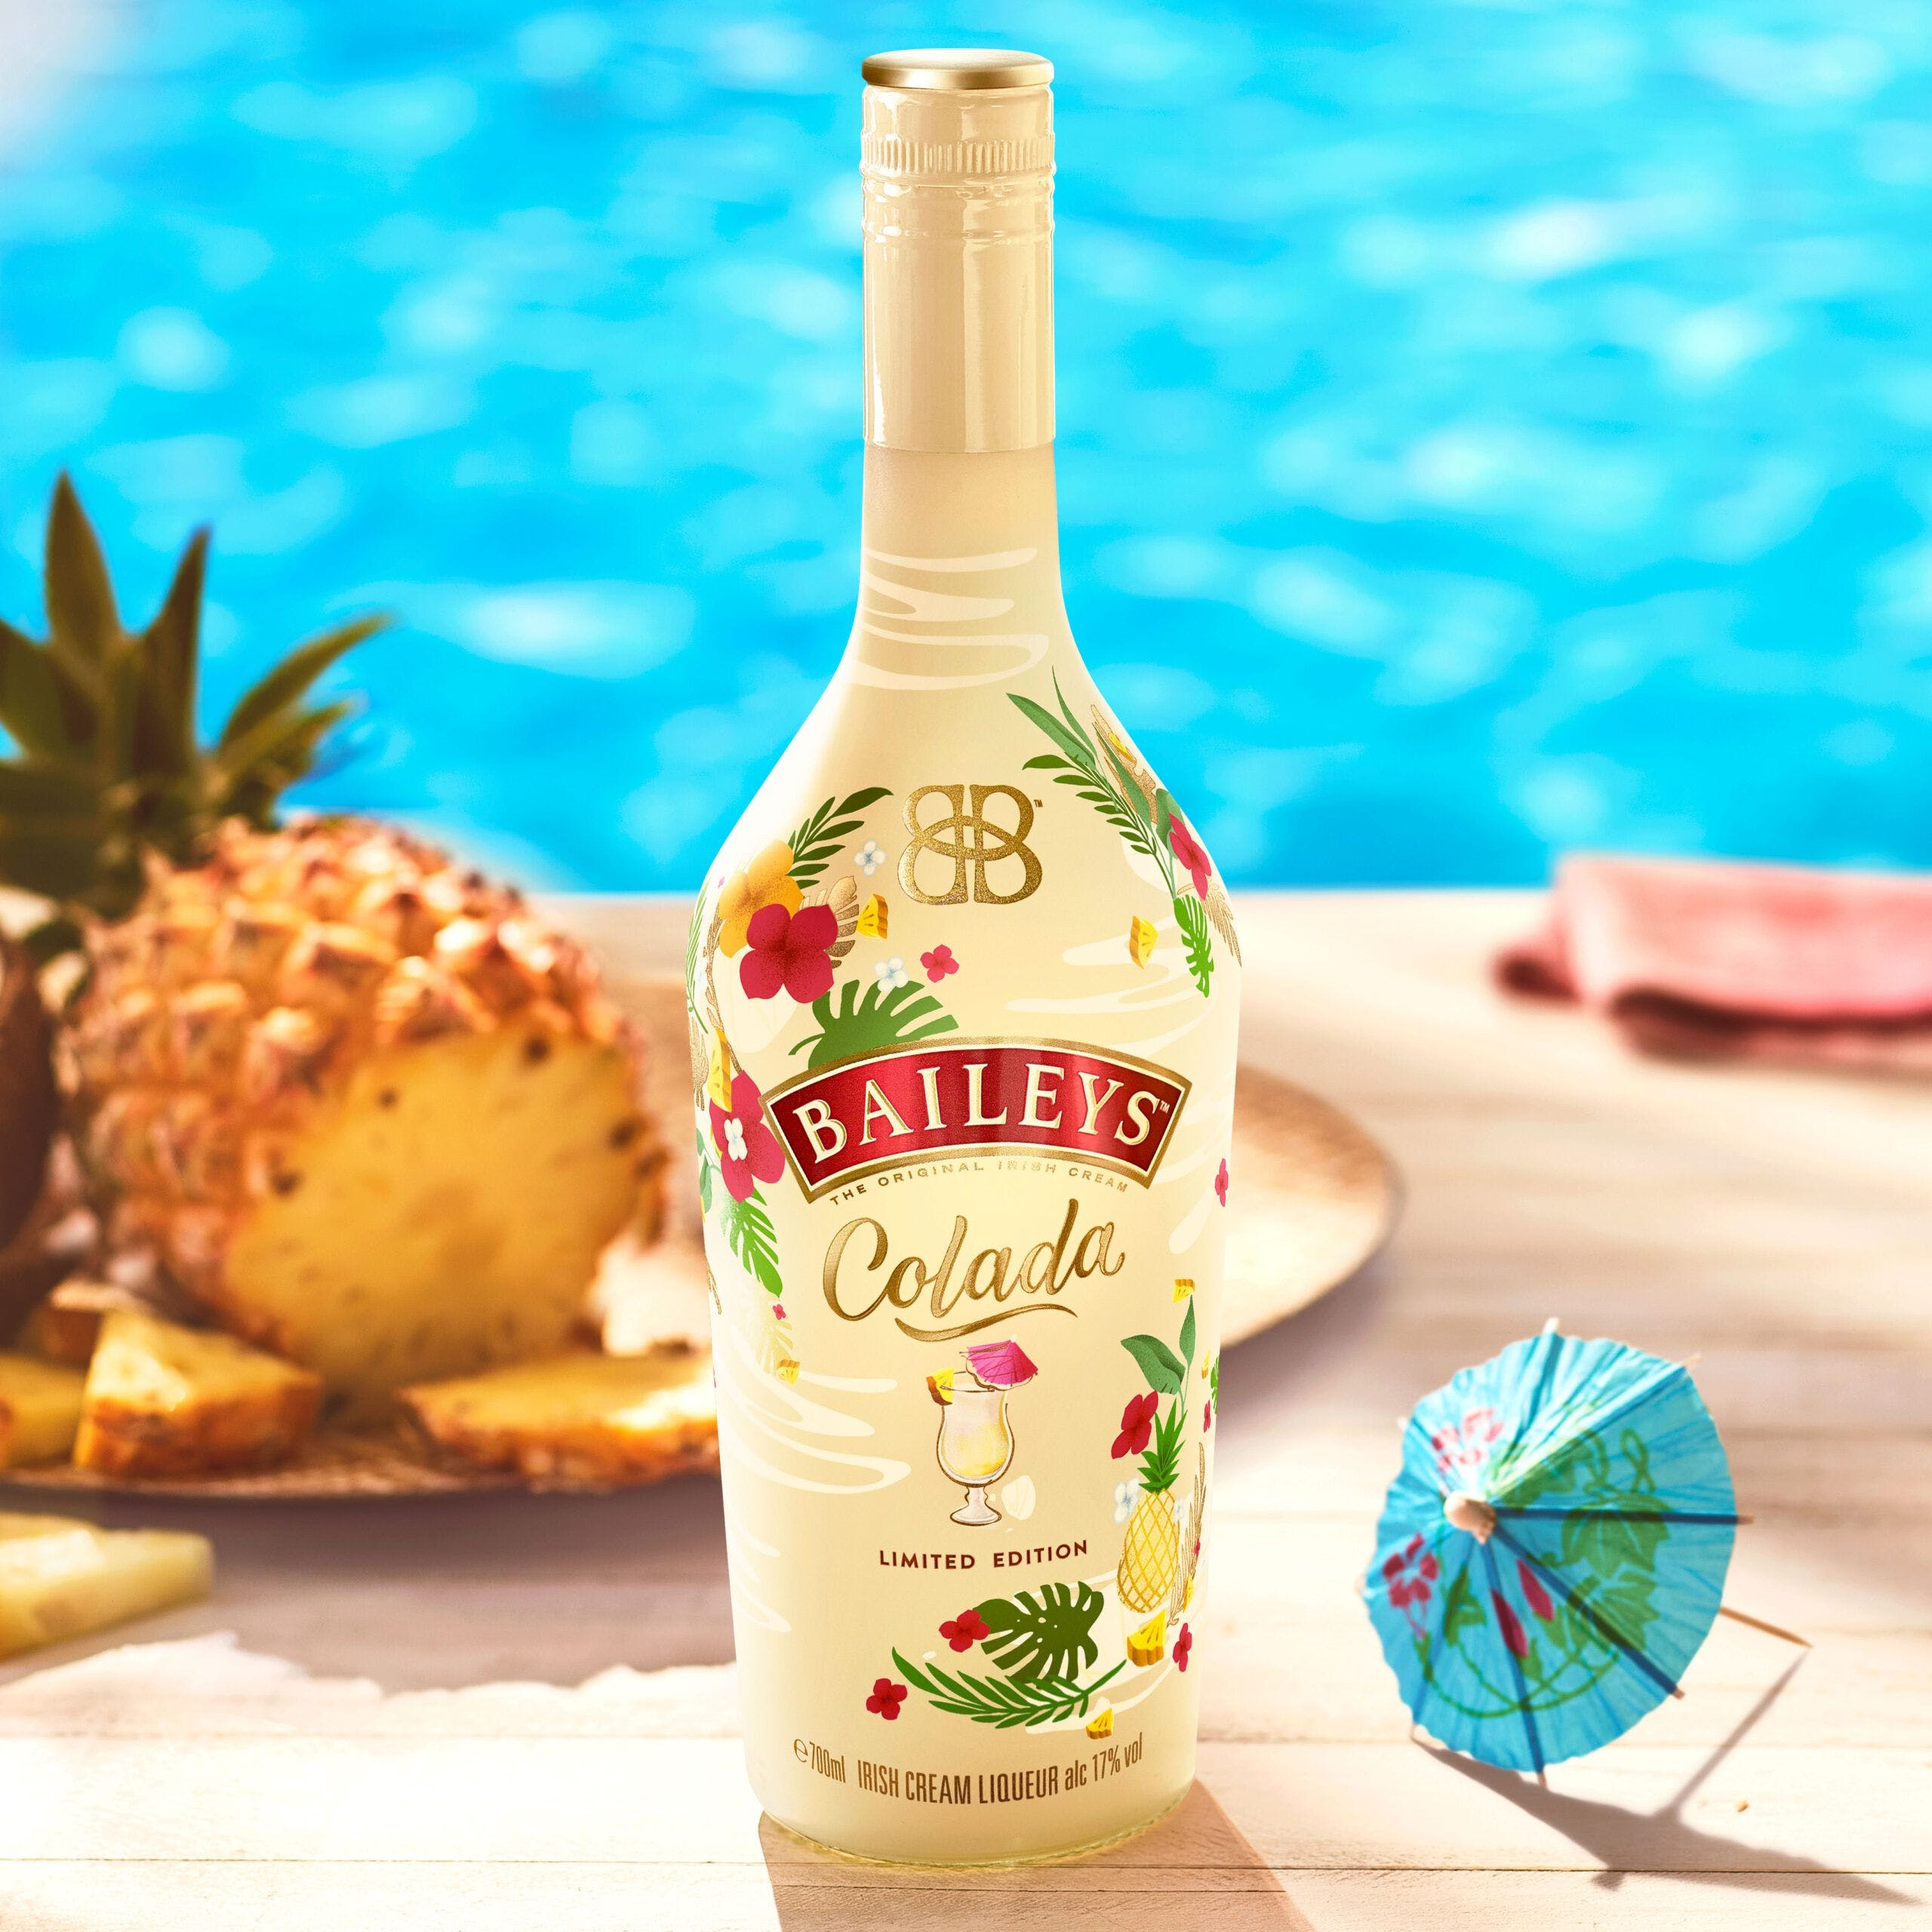 Baileys Colada has arrived in the UK! Available NOW from The Bottle Club -  House Of Coco